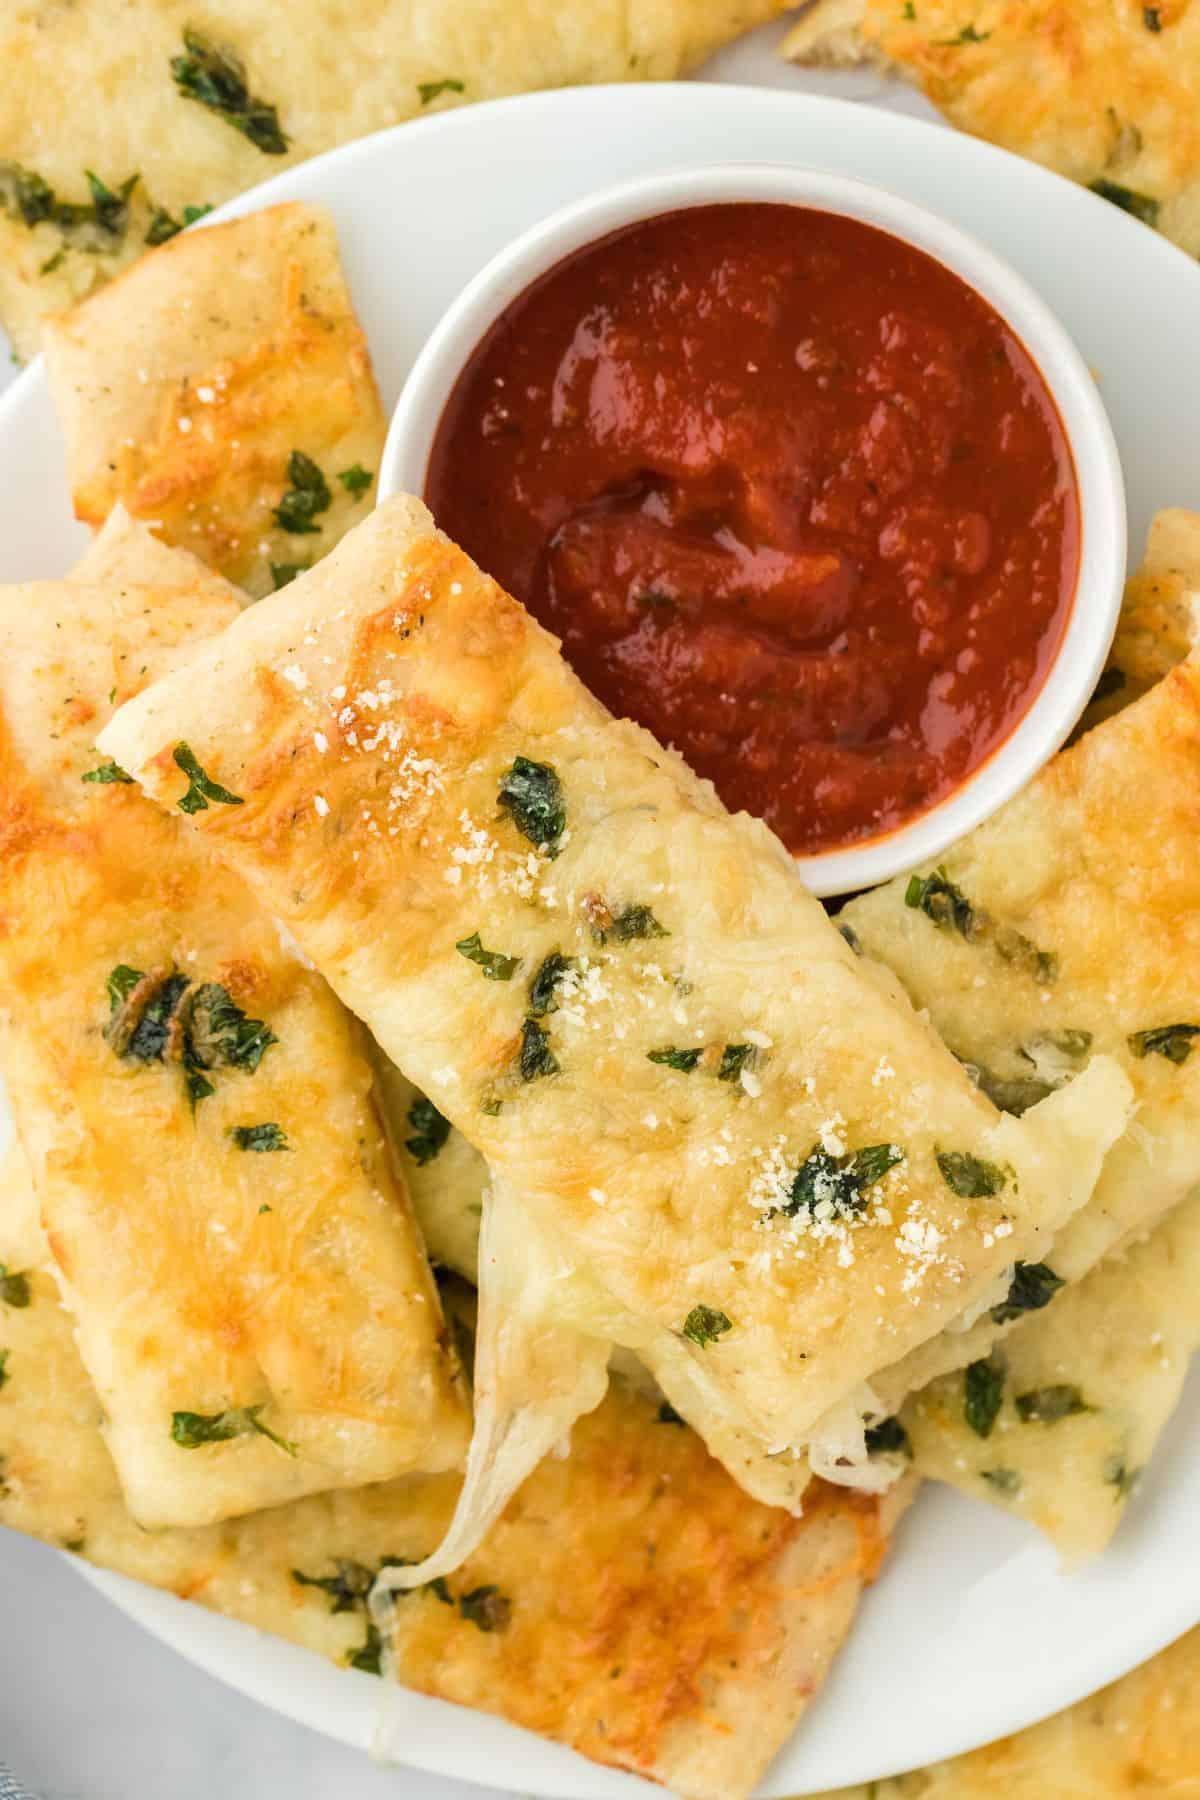 A plate of cheesy garlic breadsticks on a plate with a small bowl of marinara sauce.